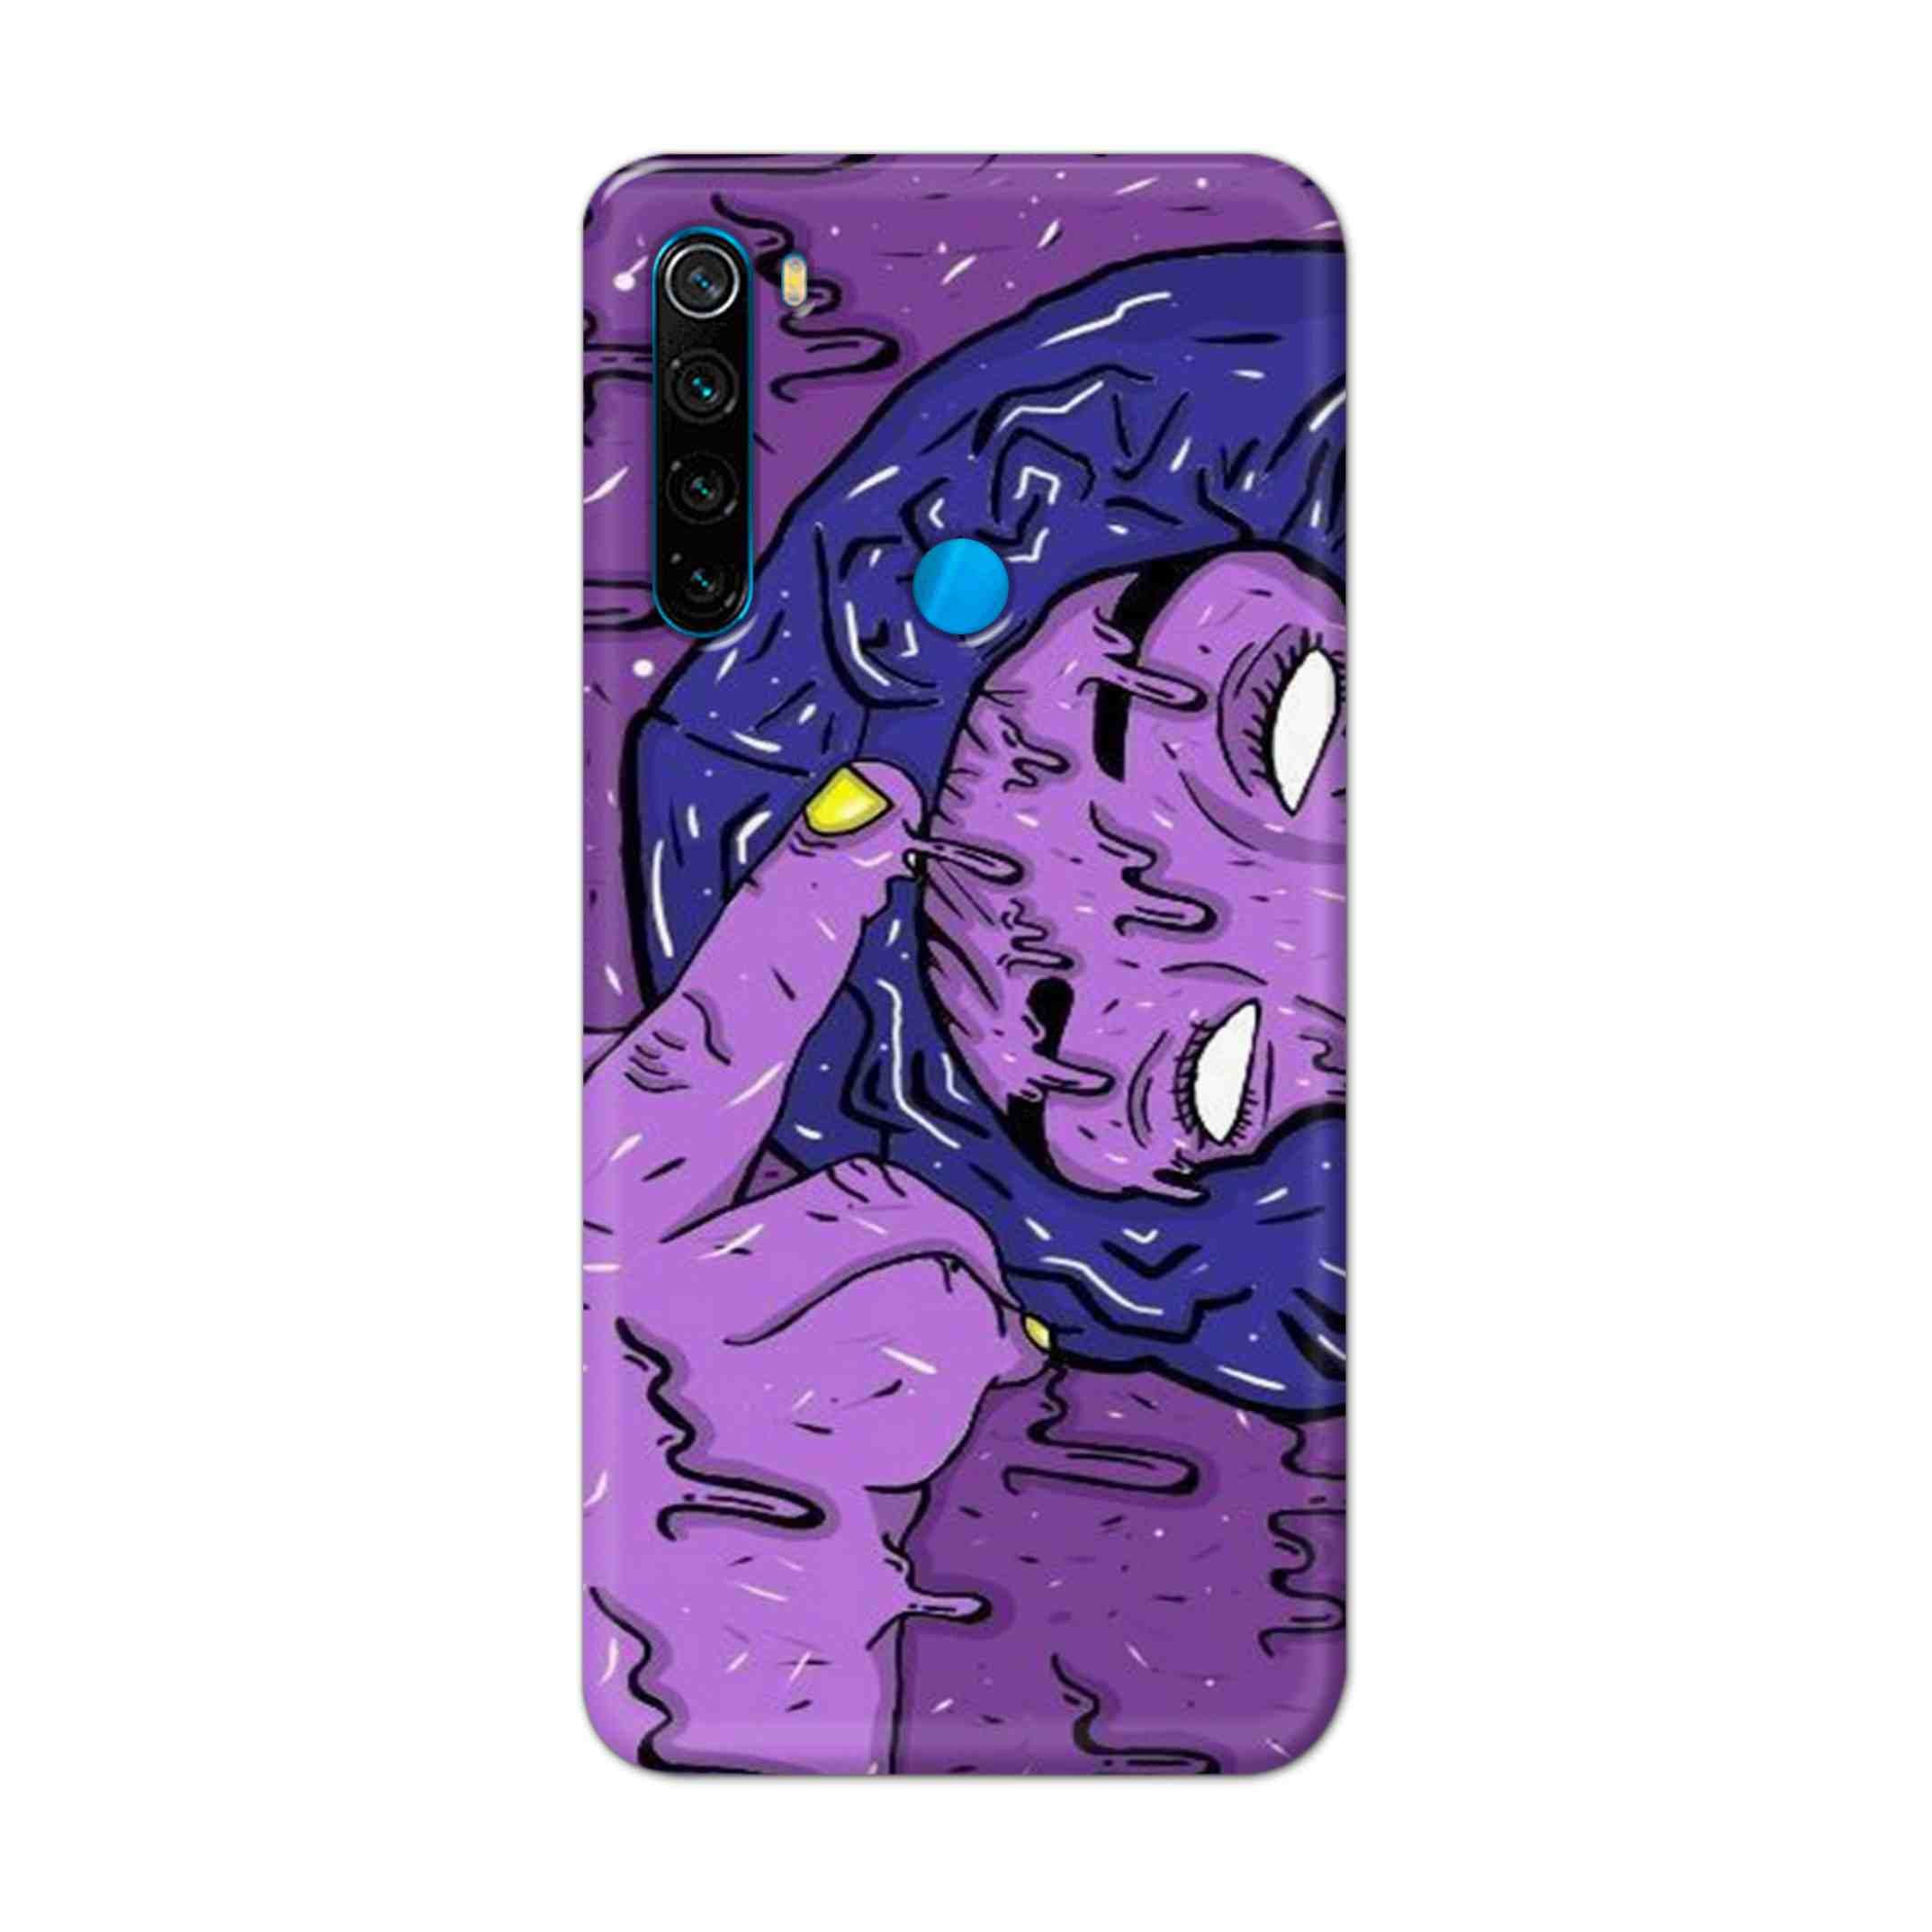 Buy Dashing Art Hard Back Mobile Phone Case Cover For Xiaomi Redmi Note 8 Online